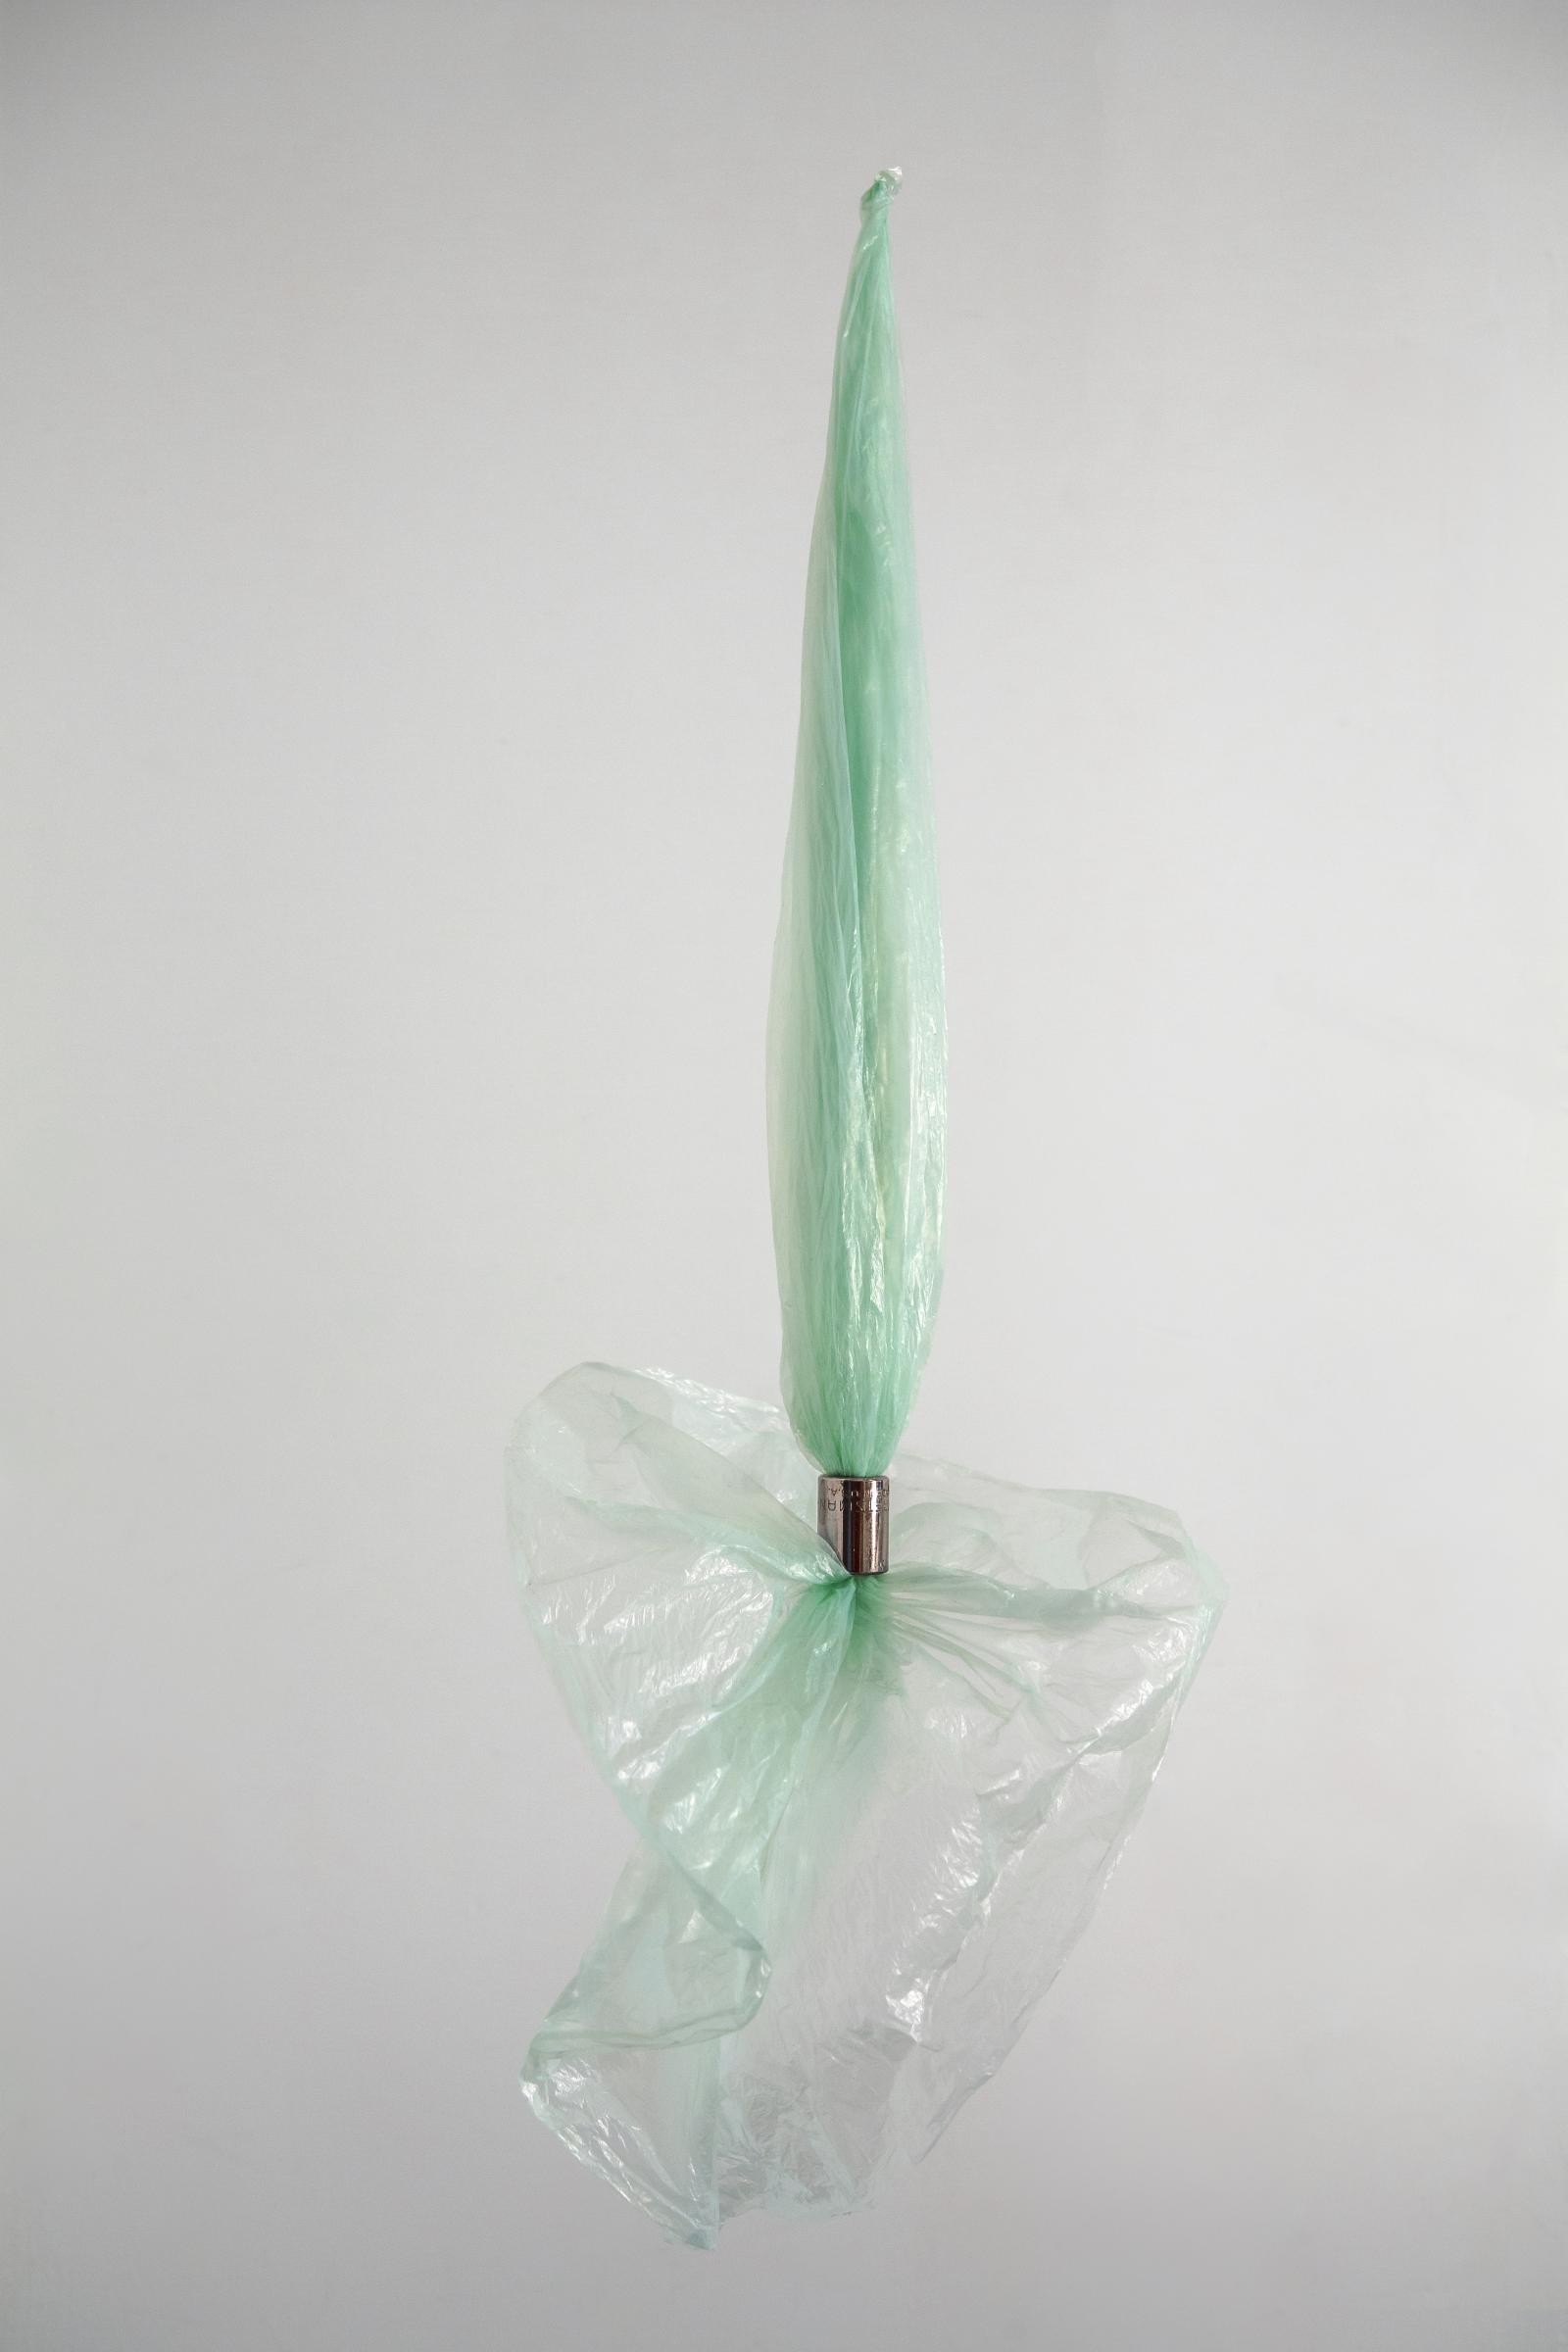 Floating on detritus (2018) is a used light green plastic bag pulled from its closed end through the half-inch opening of a cylindrical power tool socket one inch in height. Hung from transparent fishing line, about two-thirds of the delicate material bunch together under the weight of the metal hardware and gravity to form a top body akin to a folded umbrella. The bottom part of the soft sculpture unfurls like a flower. Its translucent “petals” often catches the slightest whiff of air to set off an inverted pirouette.

This eponymous piece epitomizes the spirit of what I do - to see beauty and potential in the most humble of things.